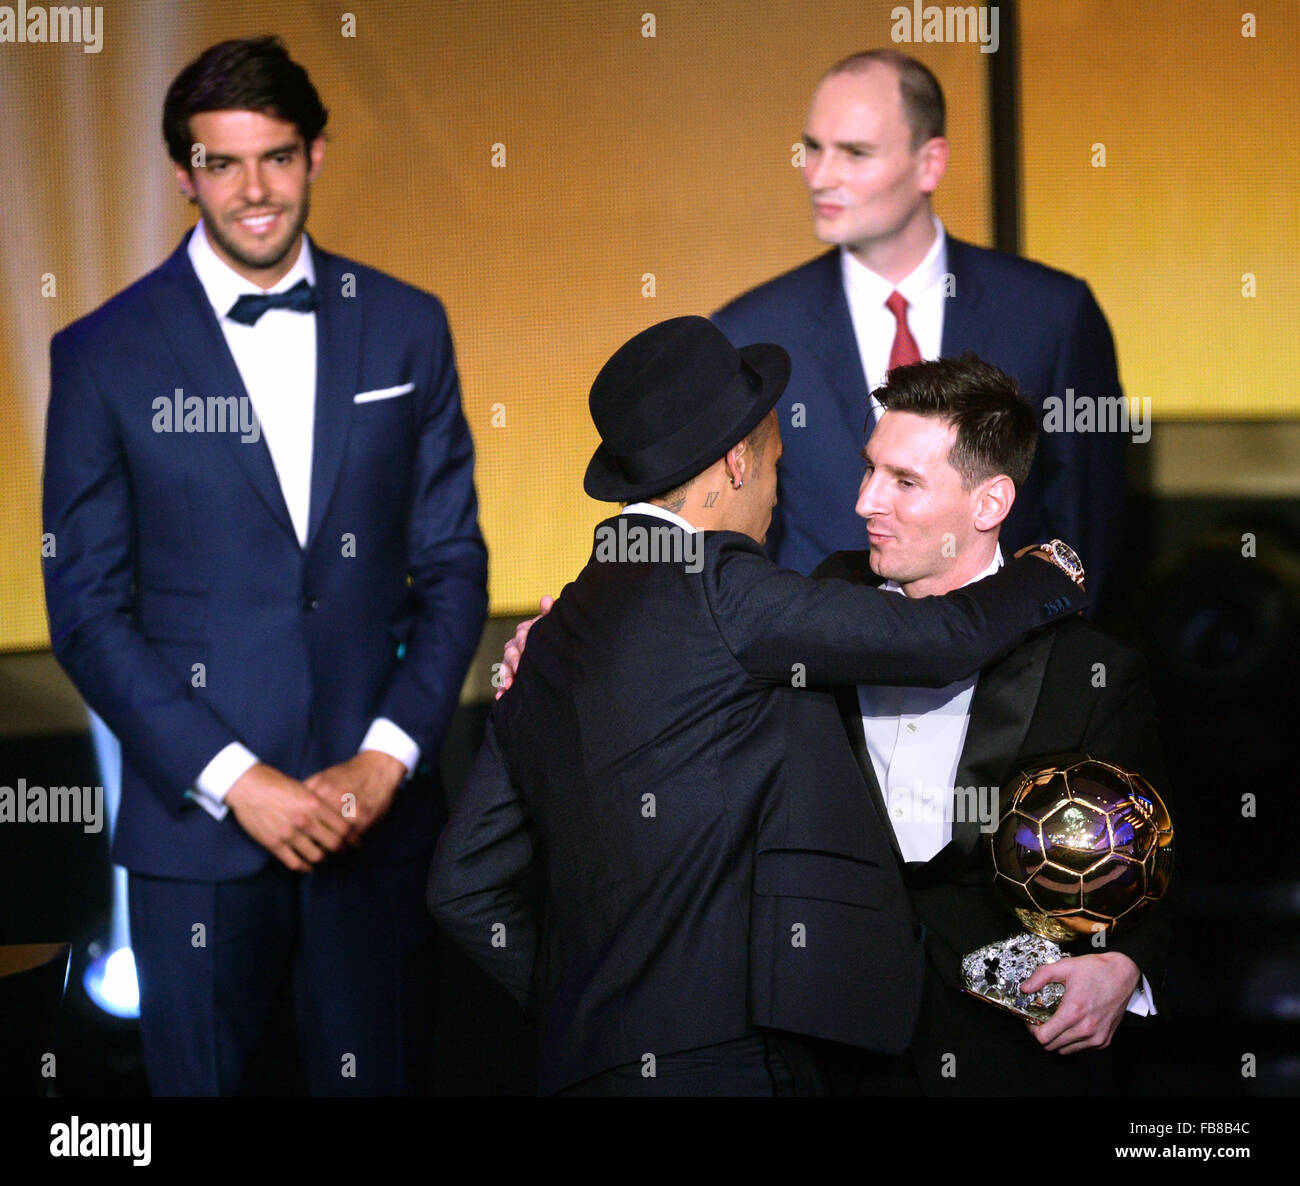 Argentina's Lionel Messi (front R) is congratulated by FC Barcelona's Neymar of Brazil, after winning the FIFA Men's soccer player of the year 2015 prize during the FIFA Ballon d'Or Gala 2015 held at the Kongresshaus in Zurich, Switzerland, 11 January 2016. Photo: Patrick Seeger/dpa Stock Photo